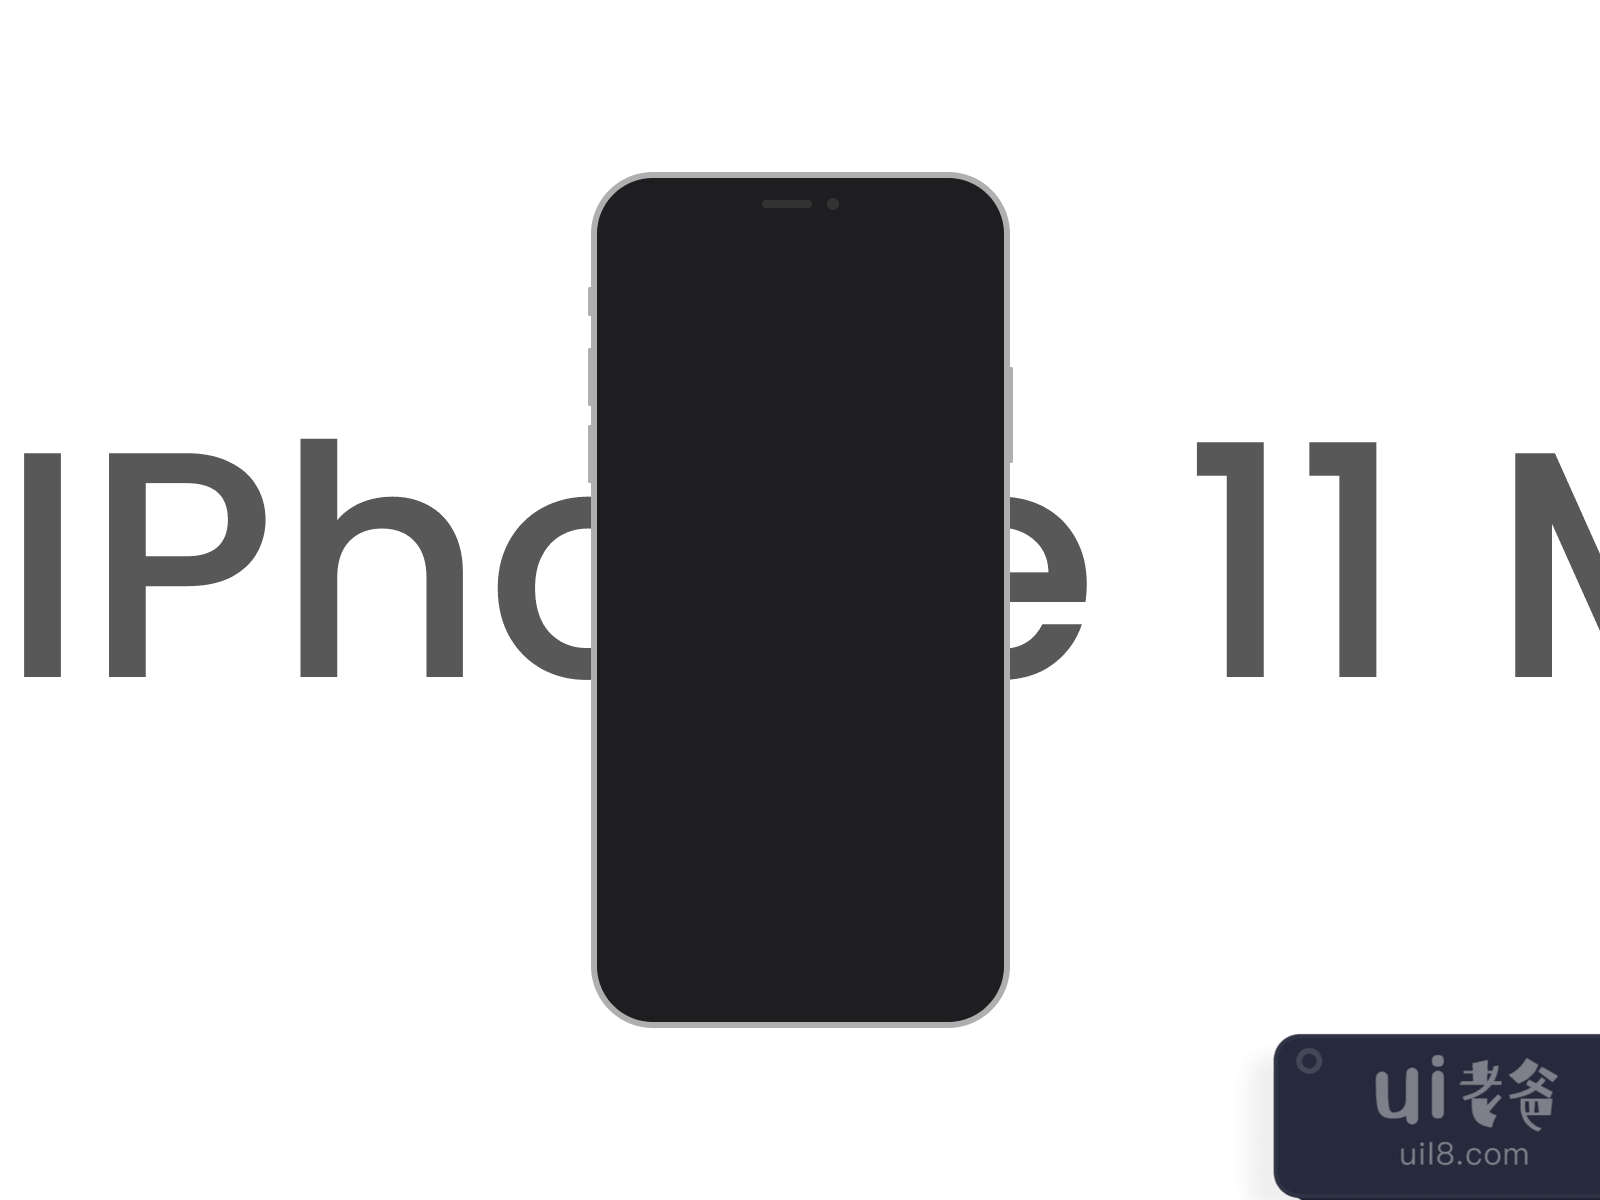 iPhone 11 Pro Flat Mockup for Figma and Adobe XD No 4